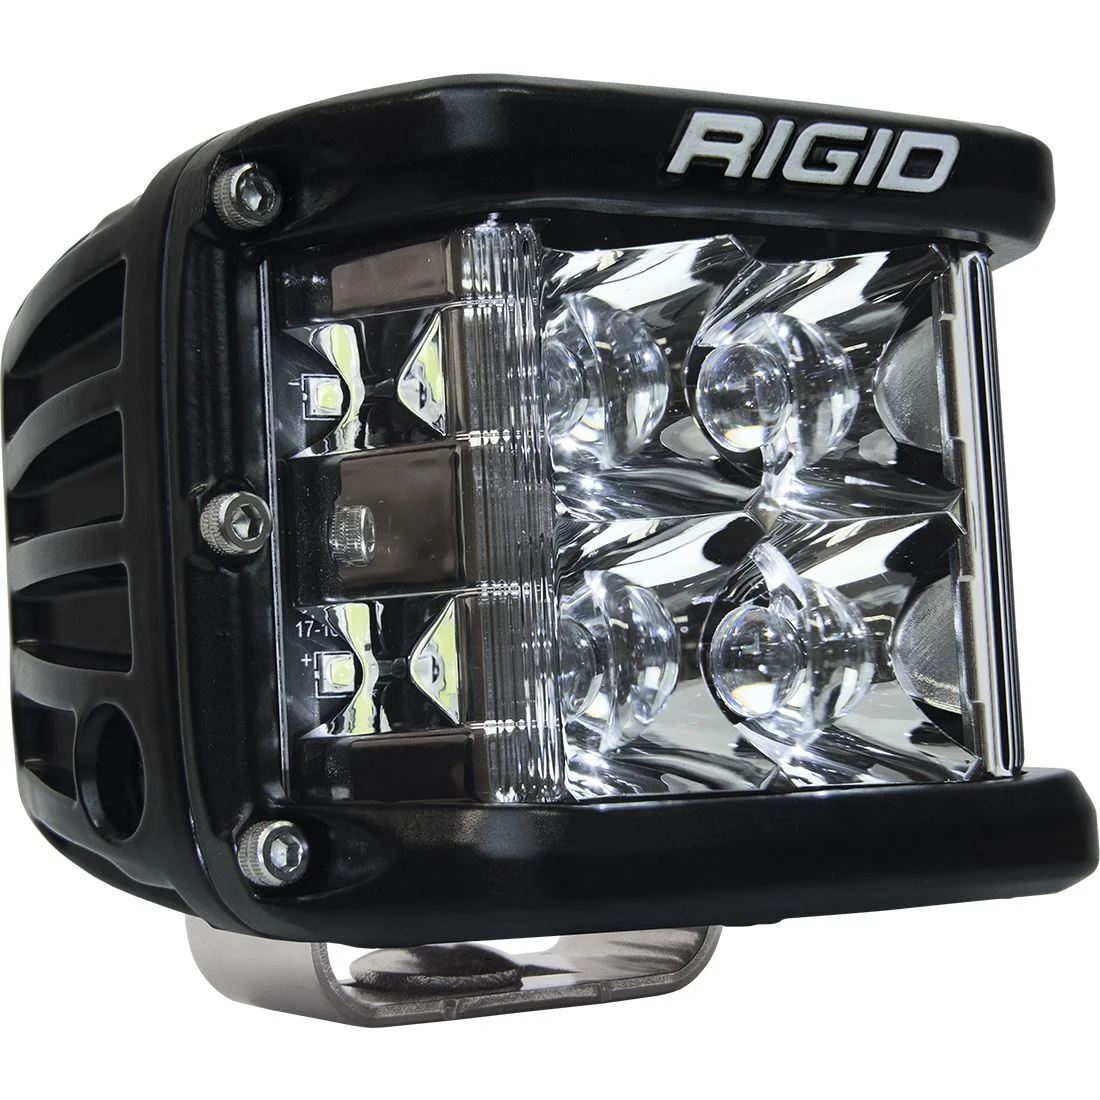 Rigid Industries D-SS Series Pro BLACK CASE SIDESHOOTER (SOLD IN SINGLES) Individual